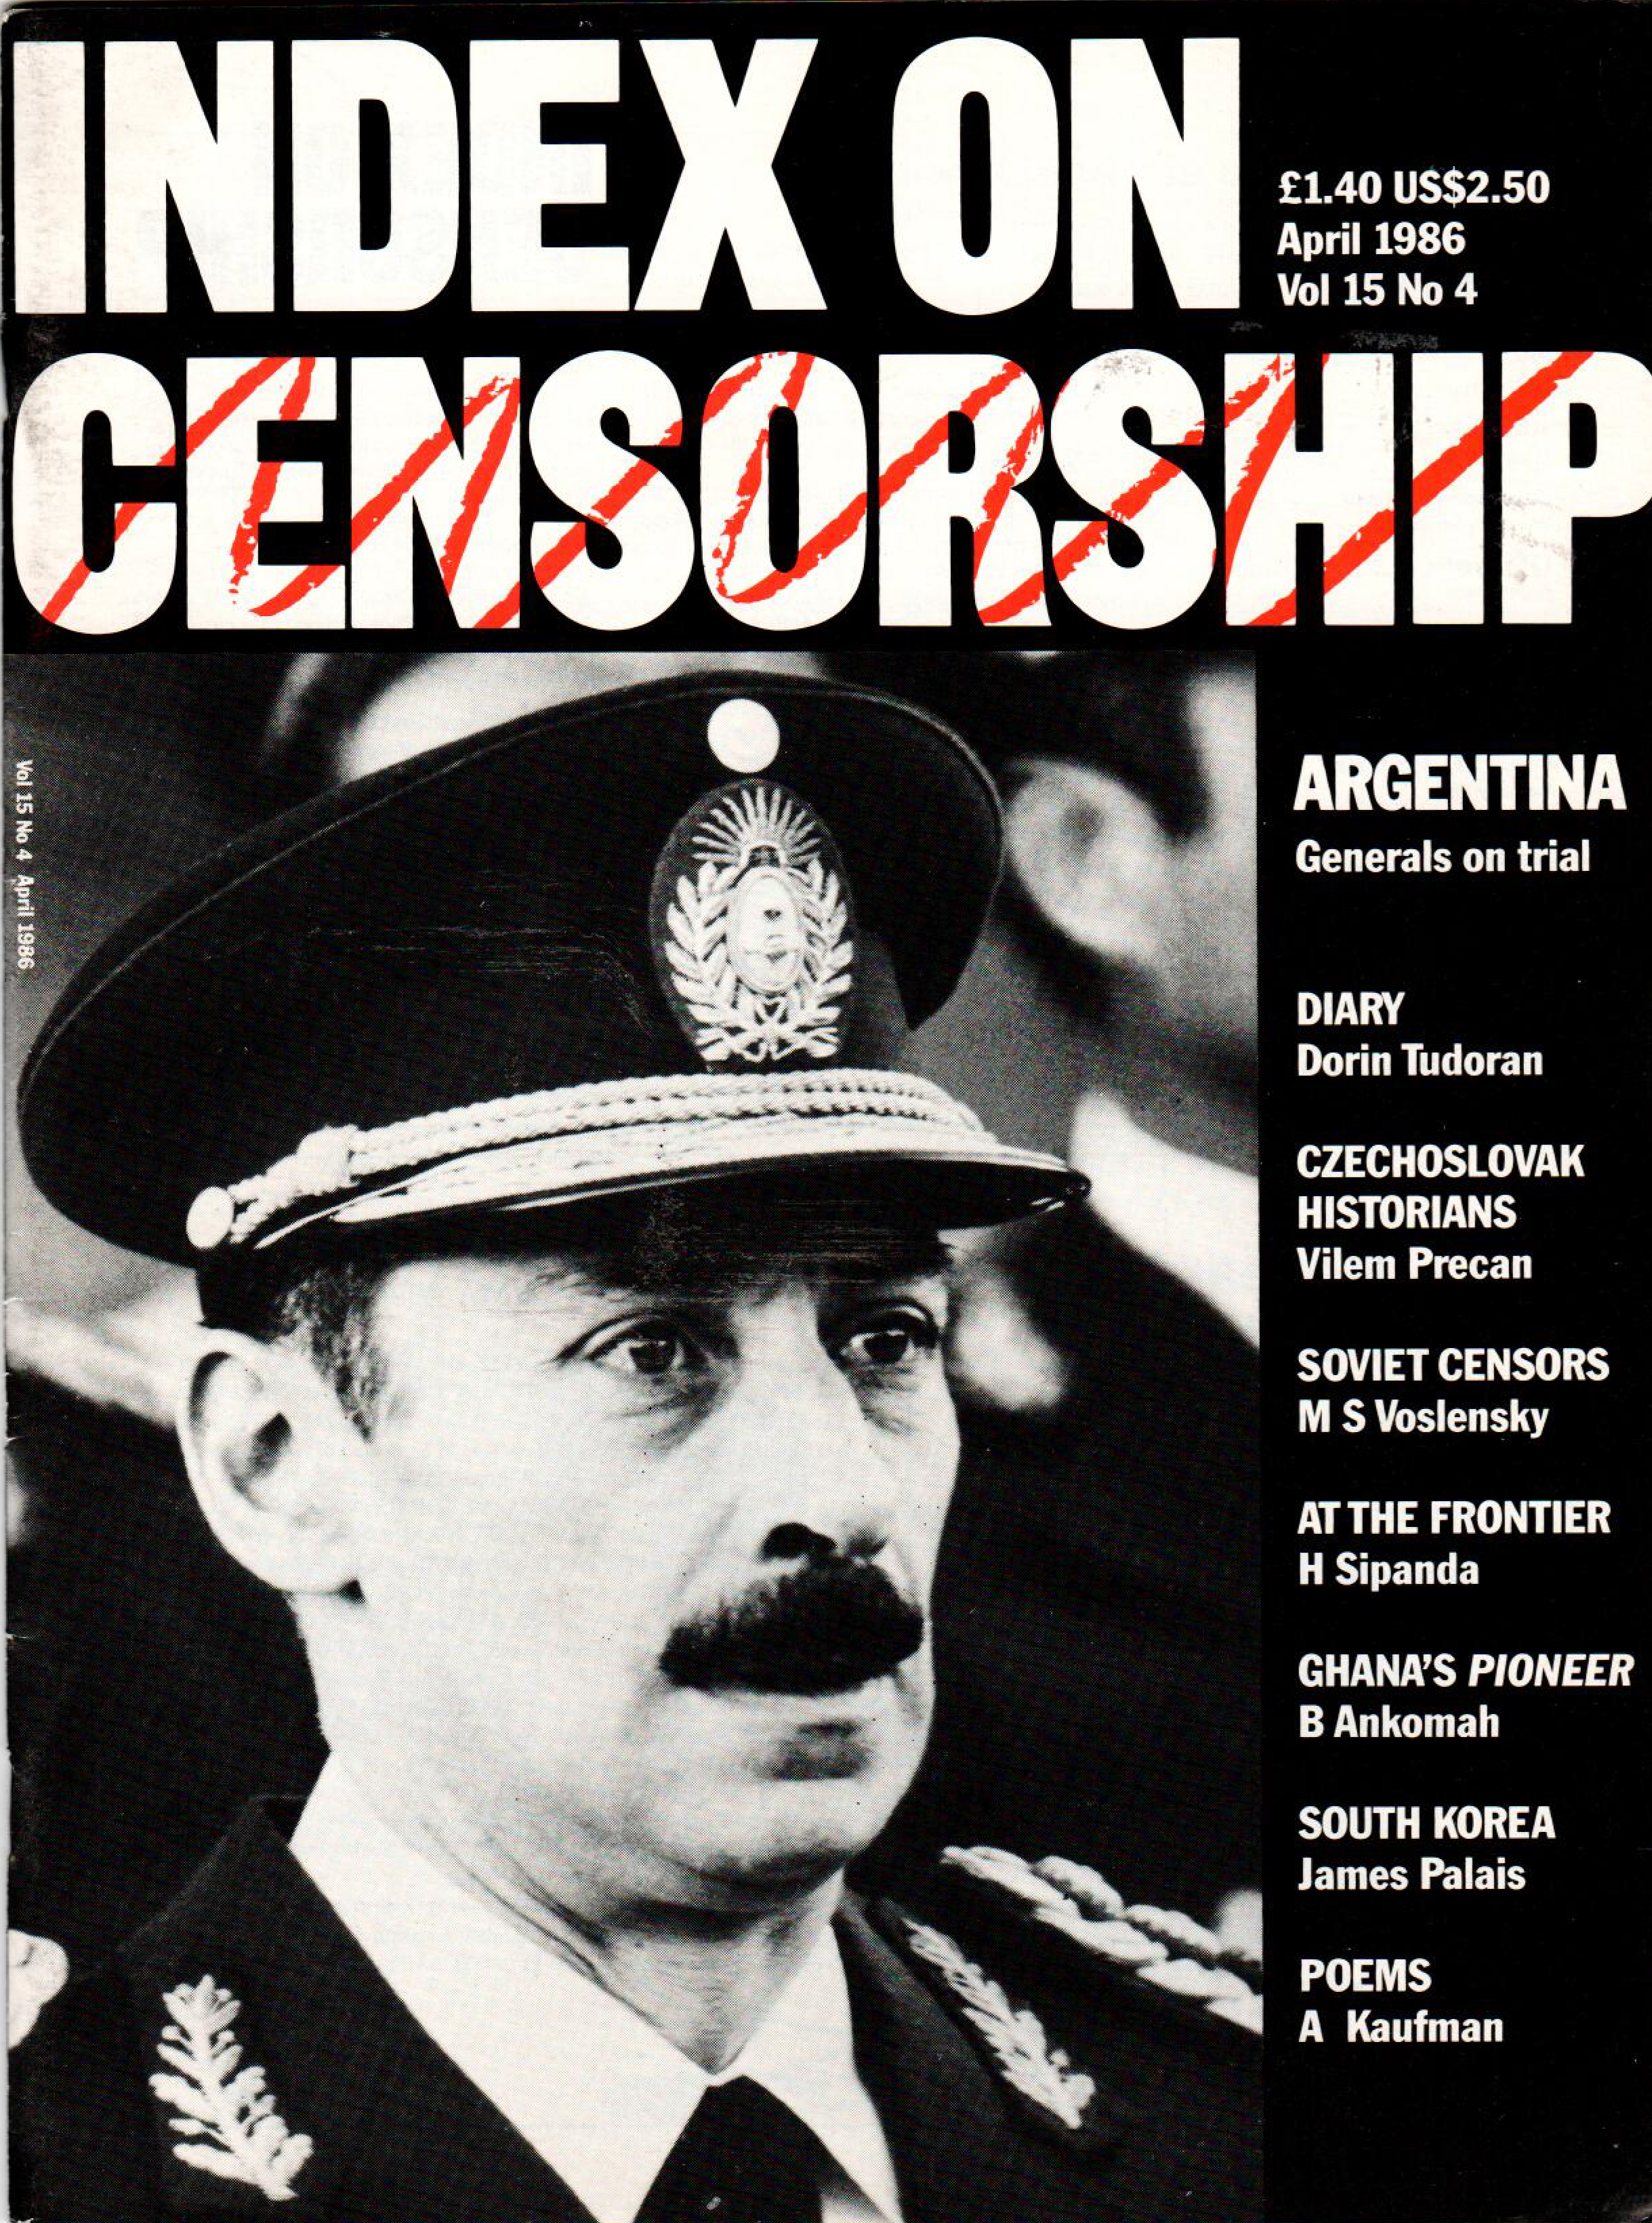 Argentina: Generals on trial, the April 1986 issue of Index on Censorship magazine.